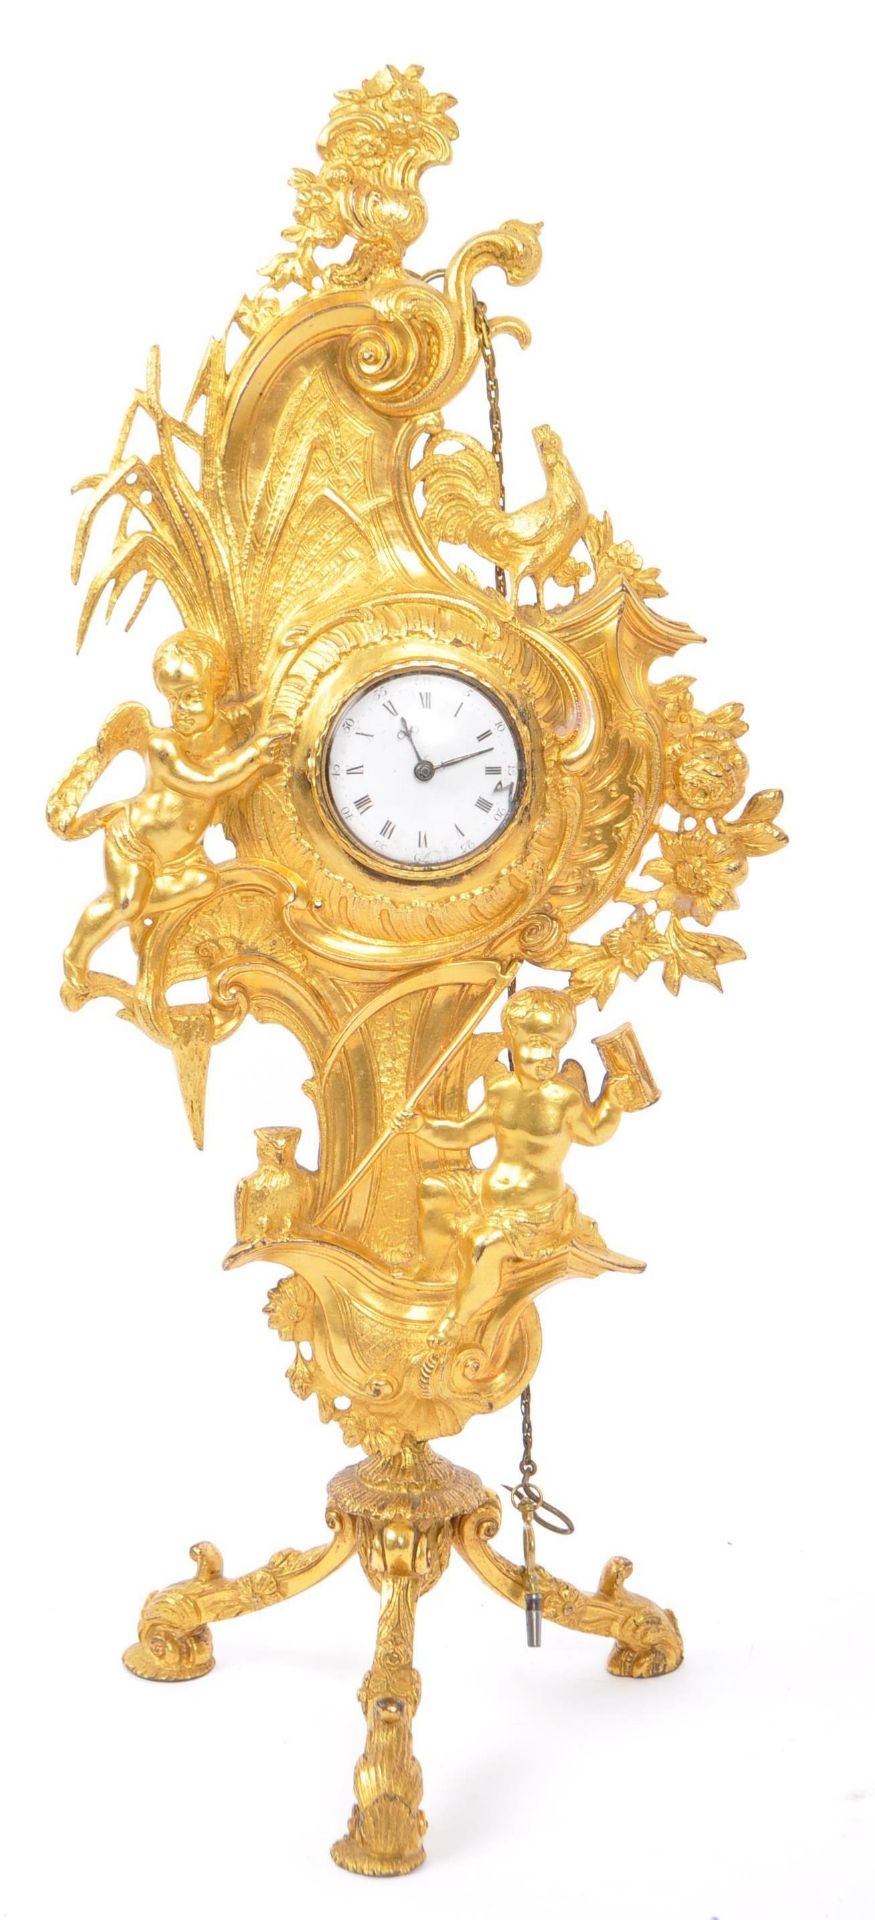 19TH CENTURY FRENCH BELLE EPOQUE ERA GILT CARTEL CLOCK ON STAND - Image 2 of 4